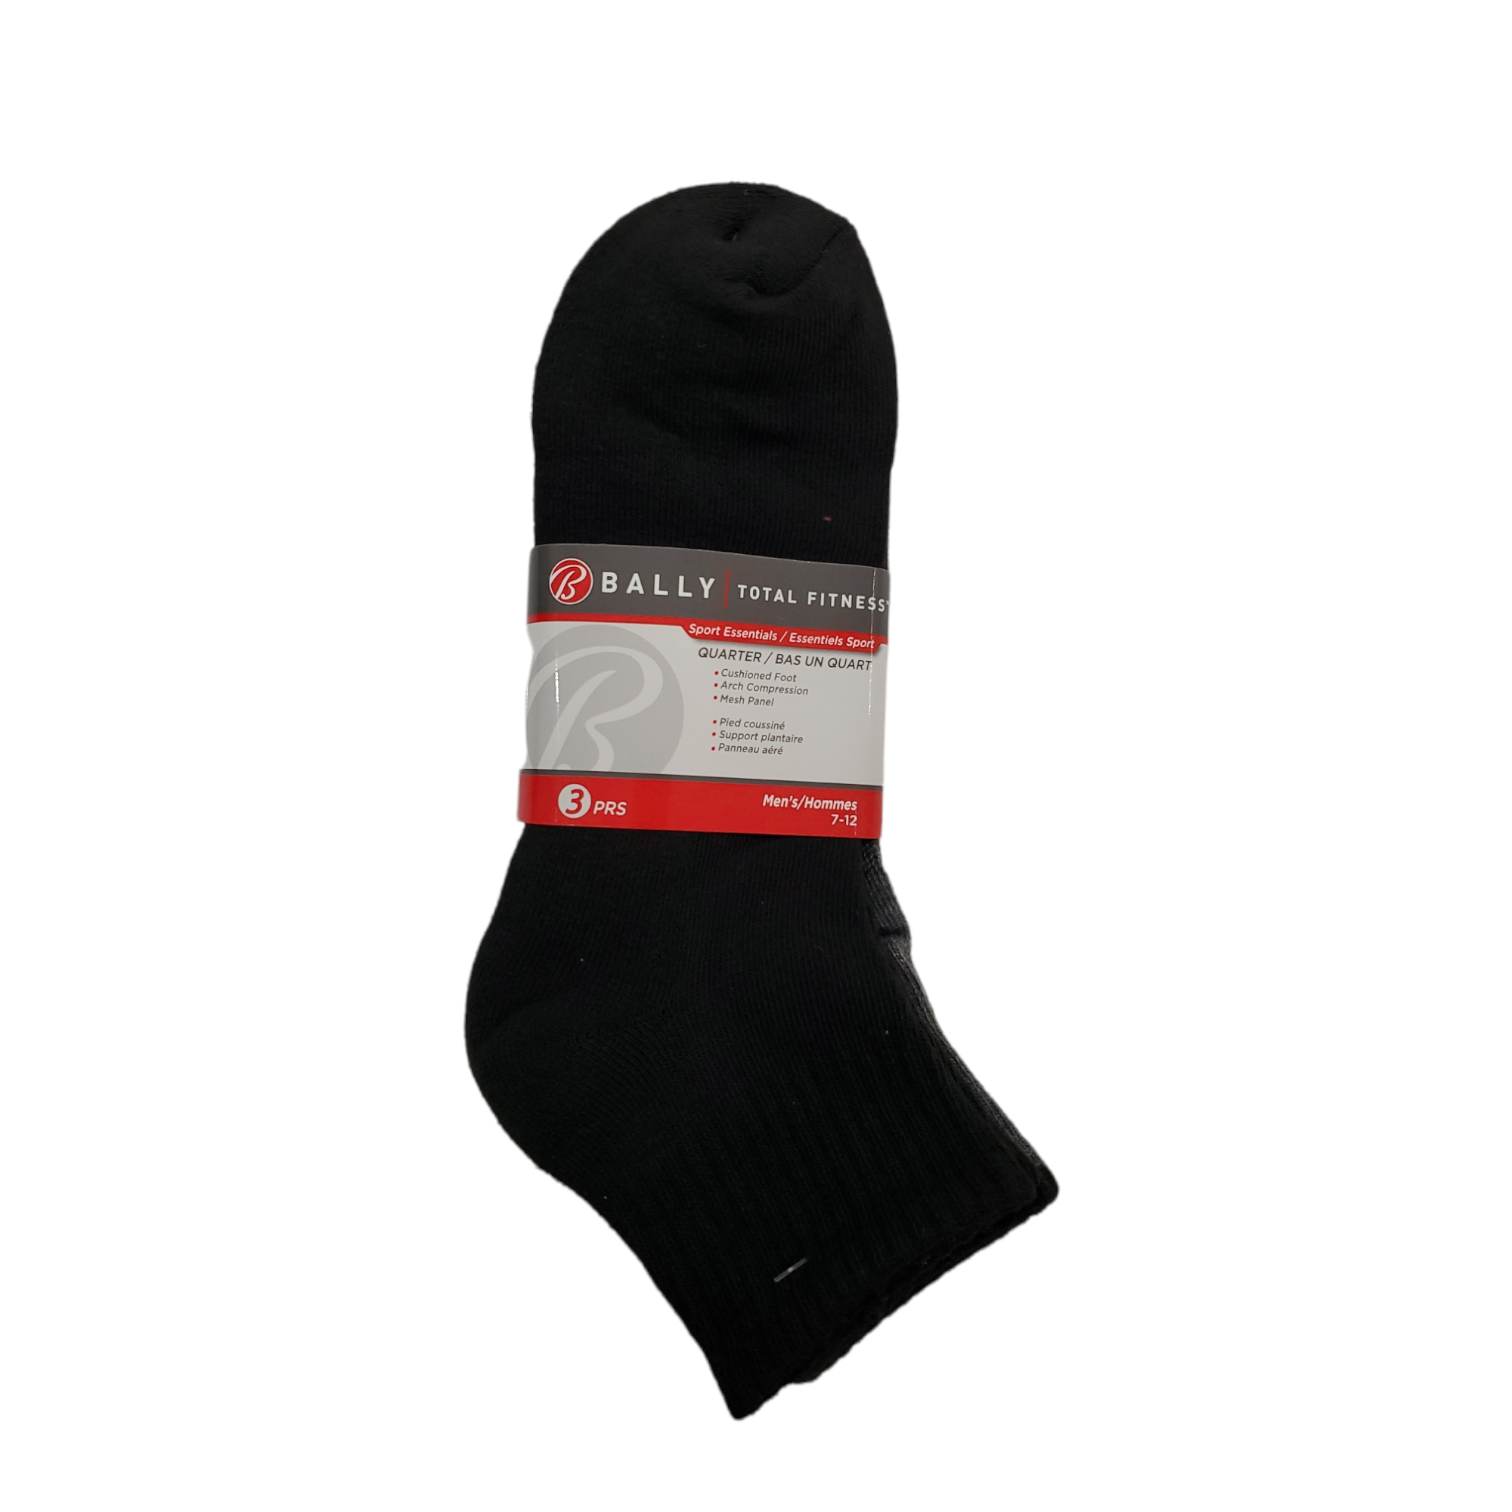 BALLY Total Fitness Socks - 6 Pairs